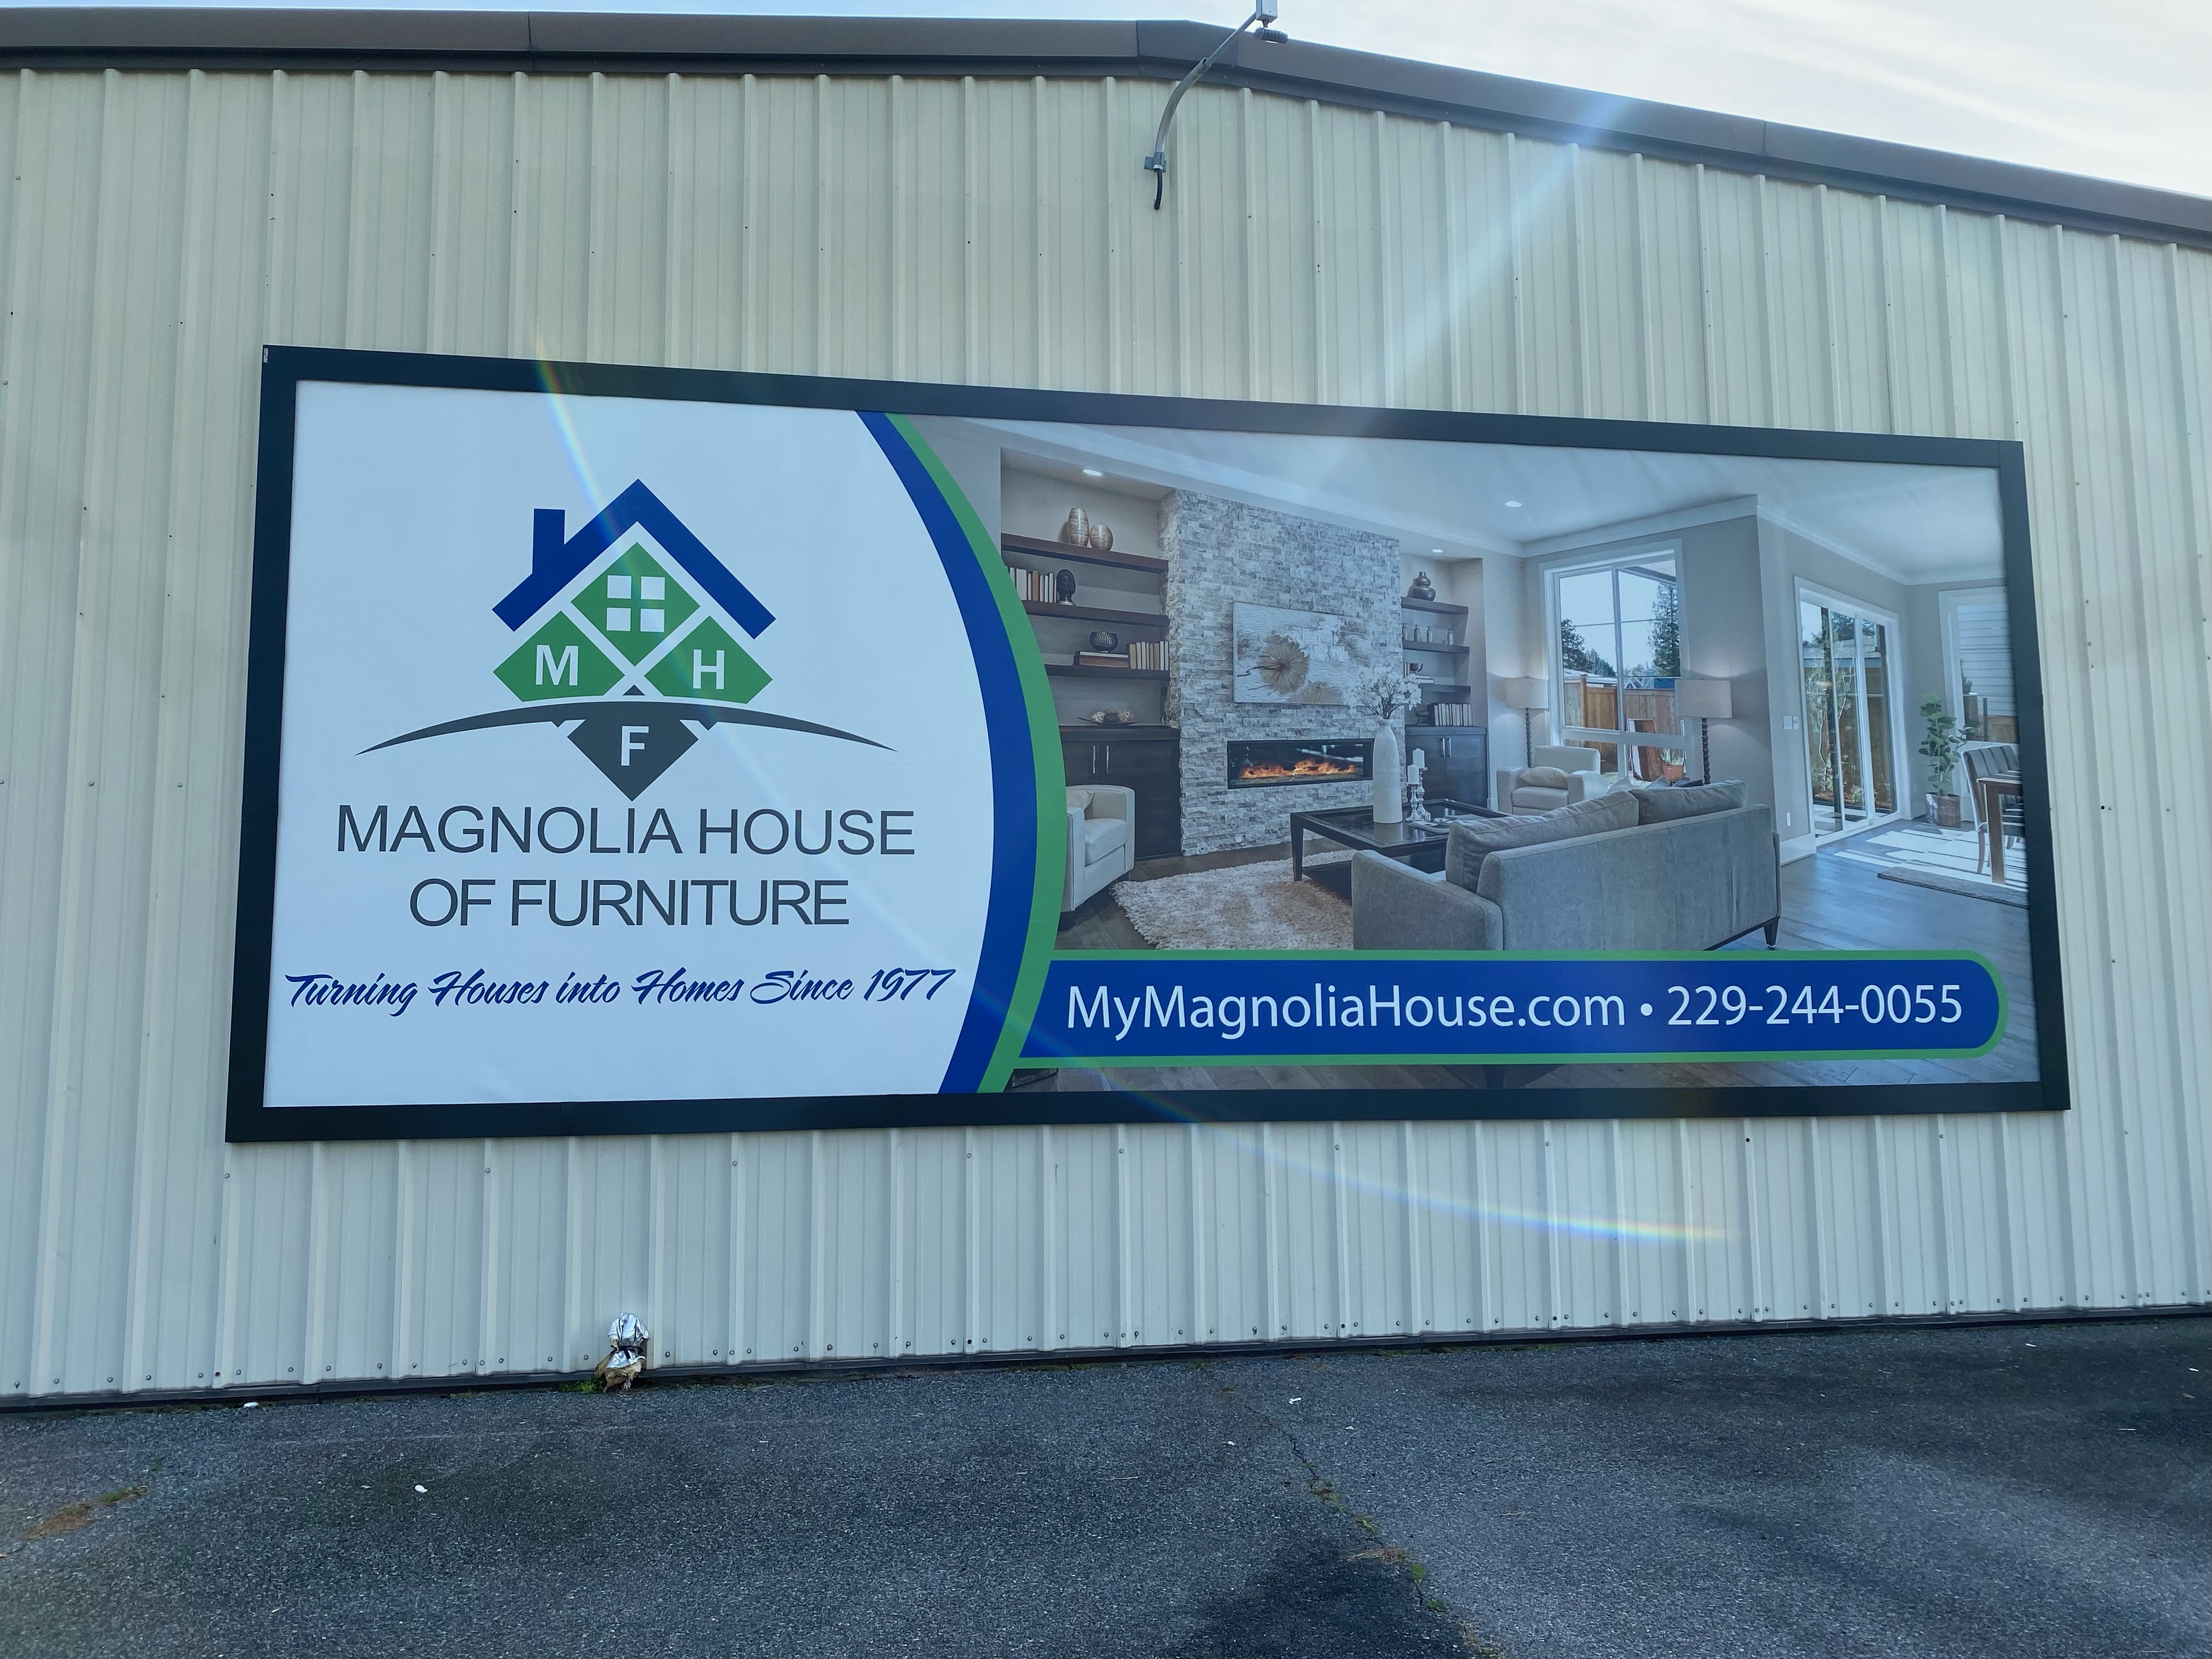 SOGA Graphics installs a SignSpring BannerFrame Classic with covers for Magnolia House of Furniture in Georgia